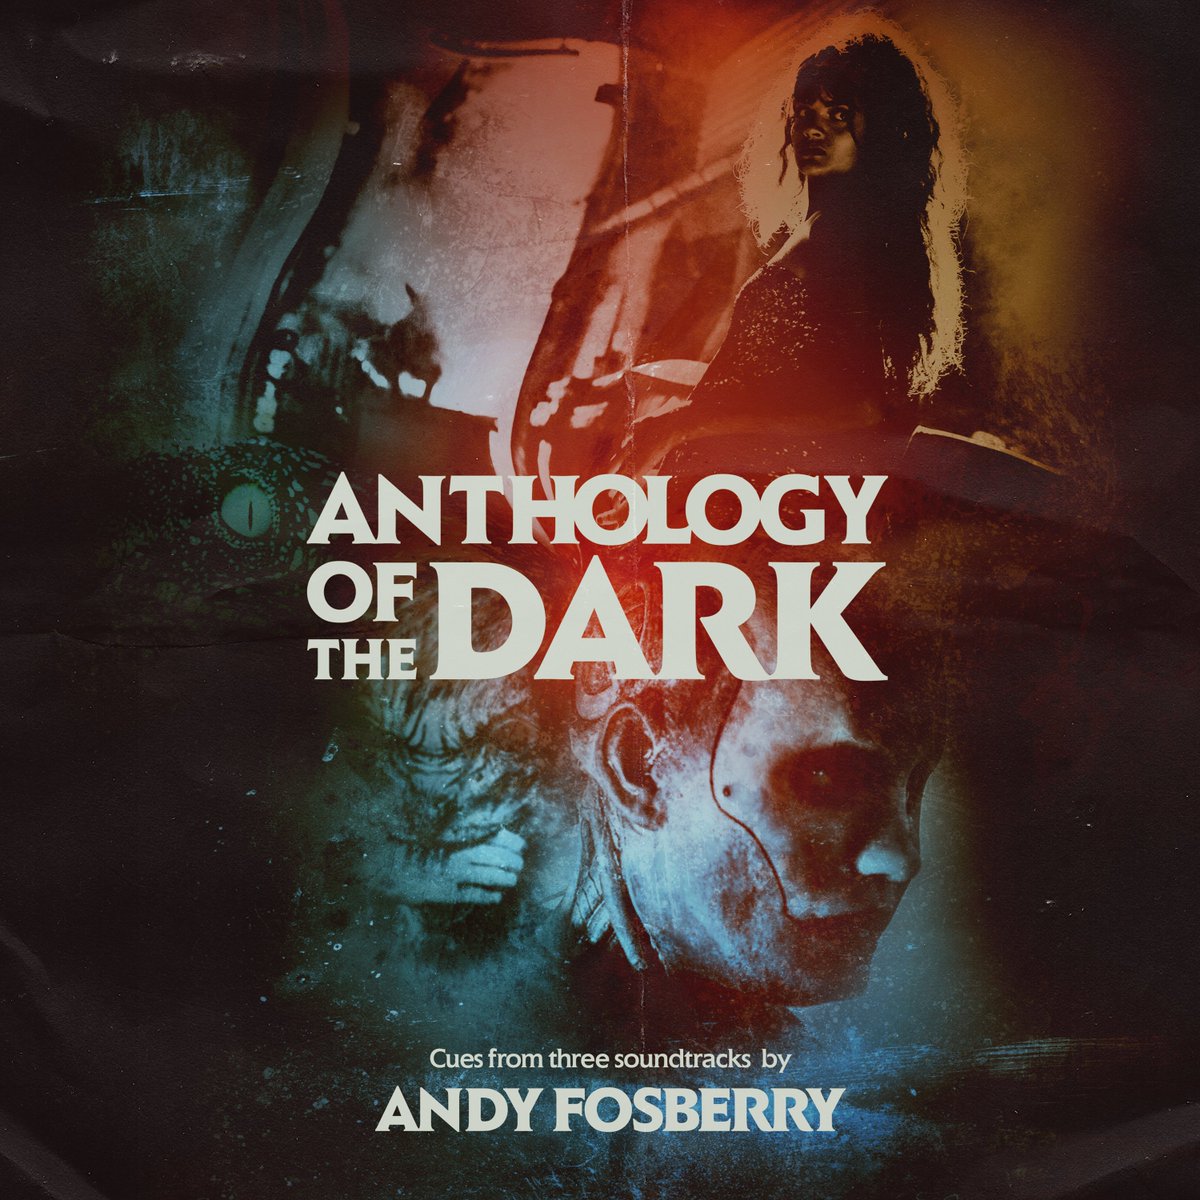 So happy to announce my brand new album, 'Anthology Of The Dark', available to order now from @SpunOutSounds! A new album compiled from extracts of three upcoming film scores. spunoutofcontrol.bandcamp.com/album/antholog…